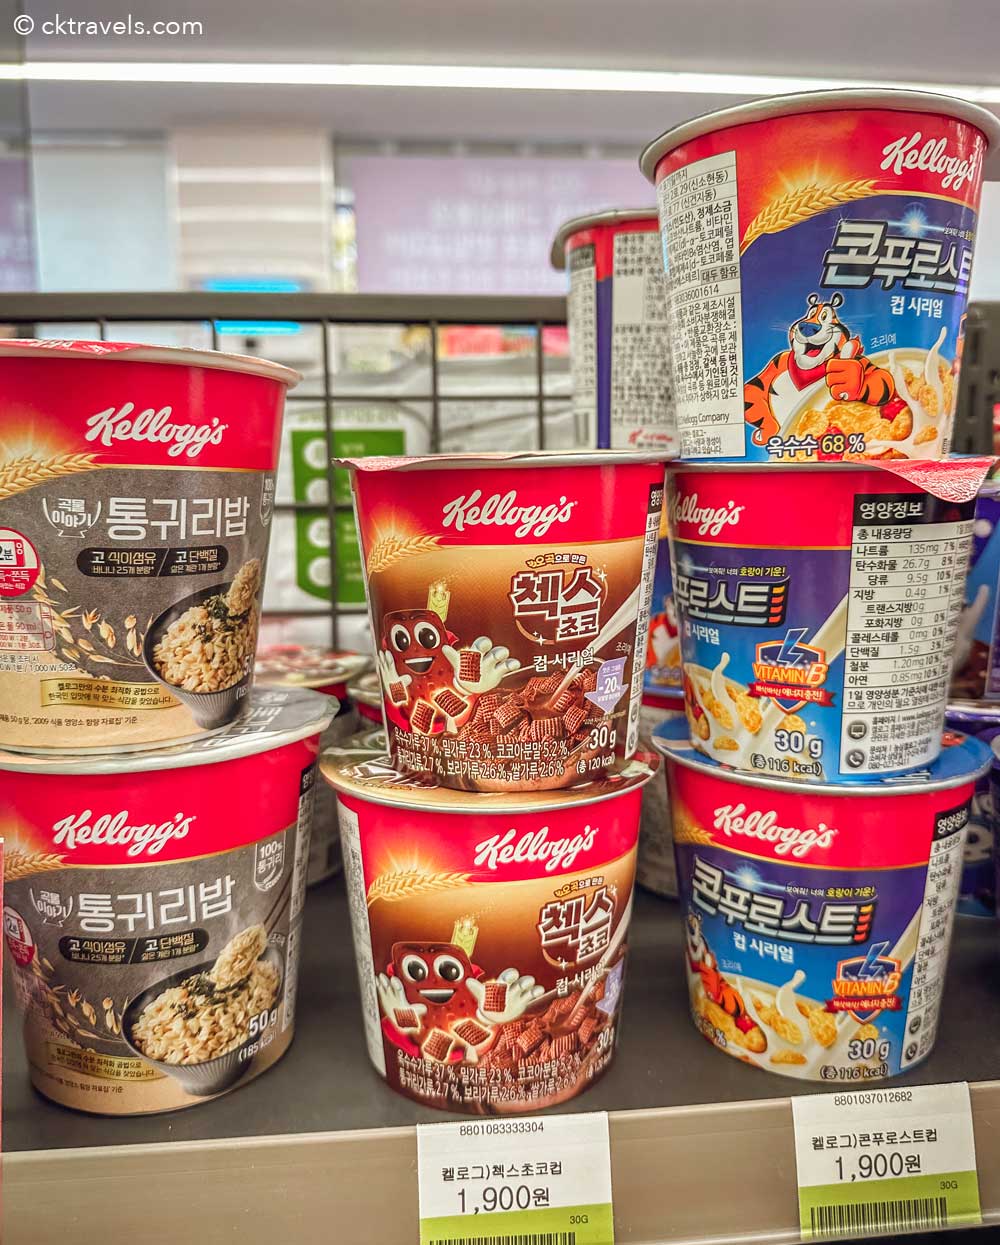 Kelloggs cereal tubs from CU convenience stores in South Korea